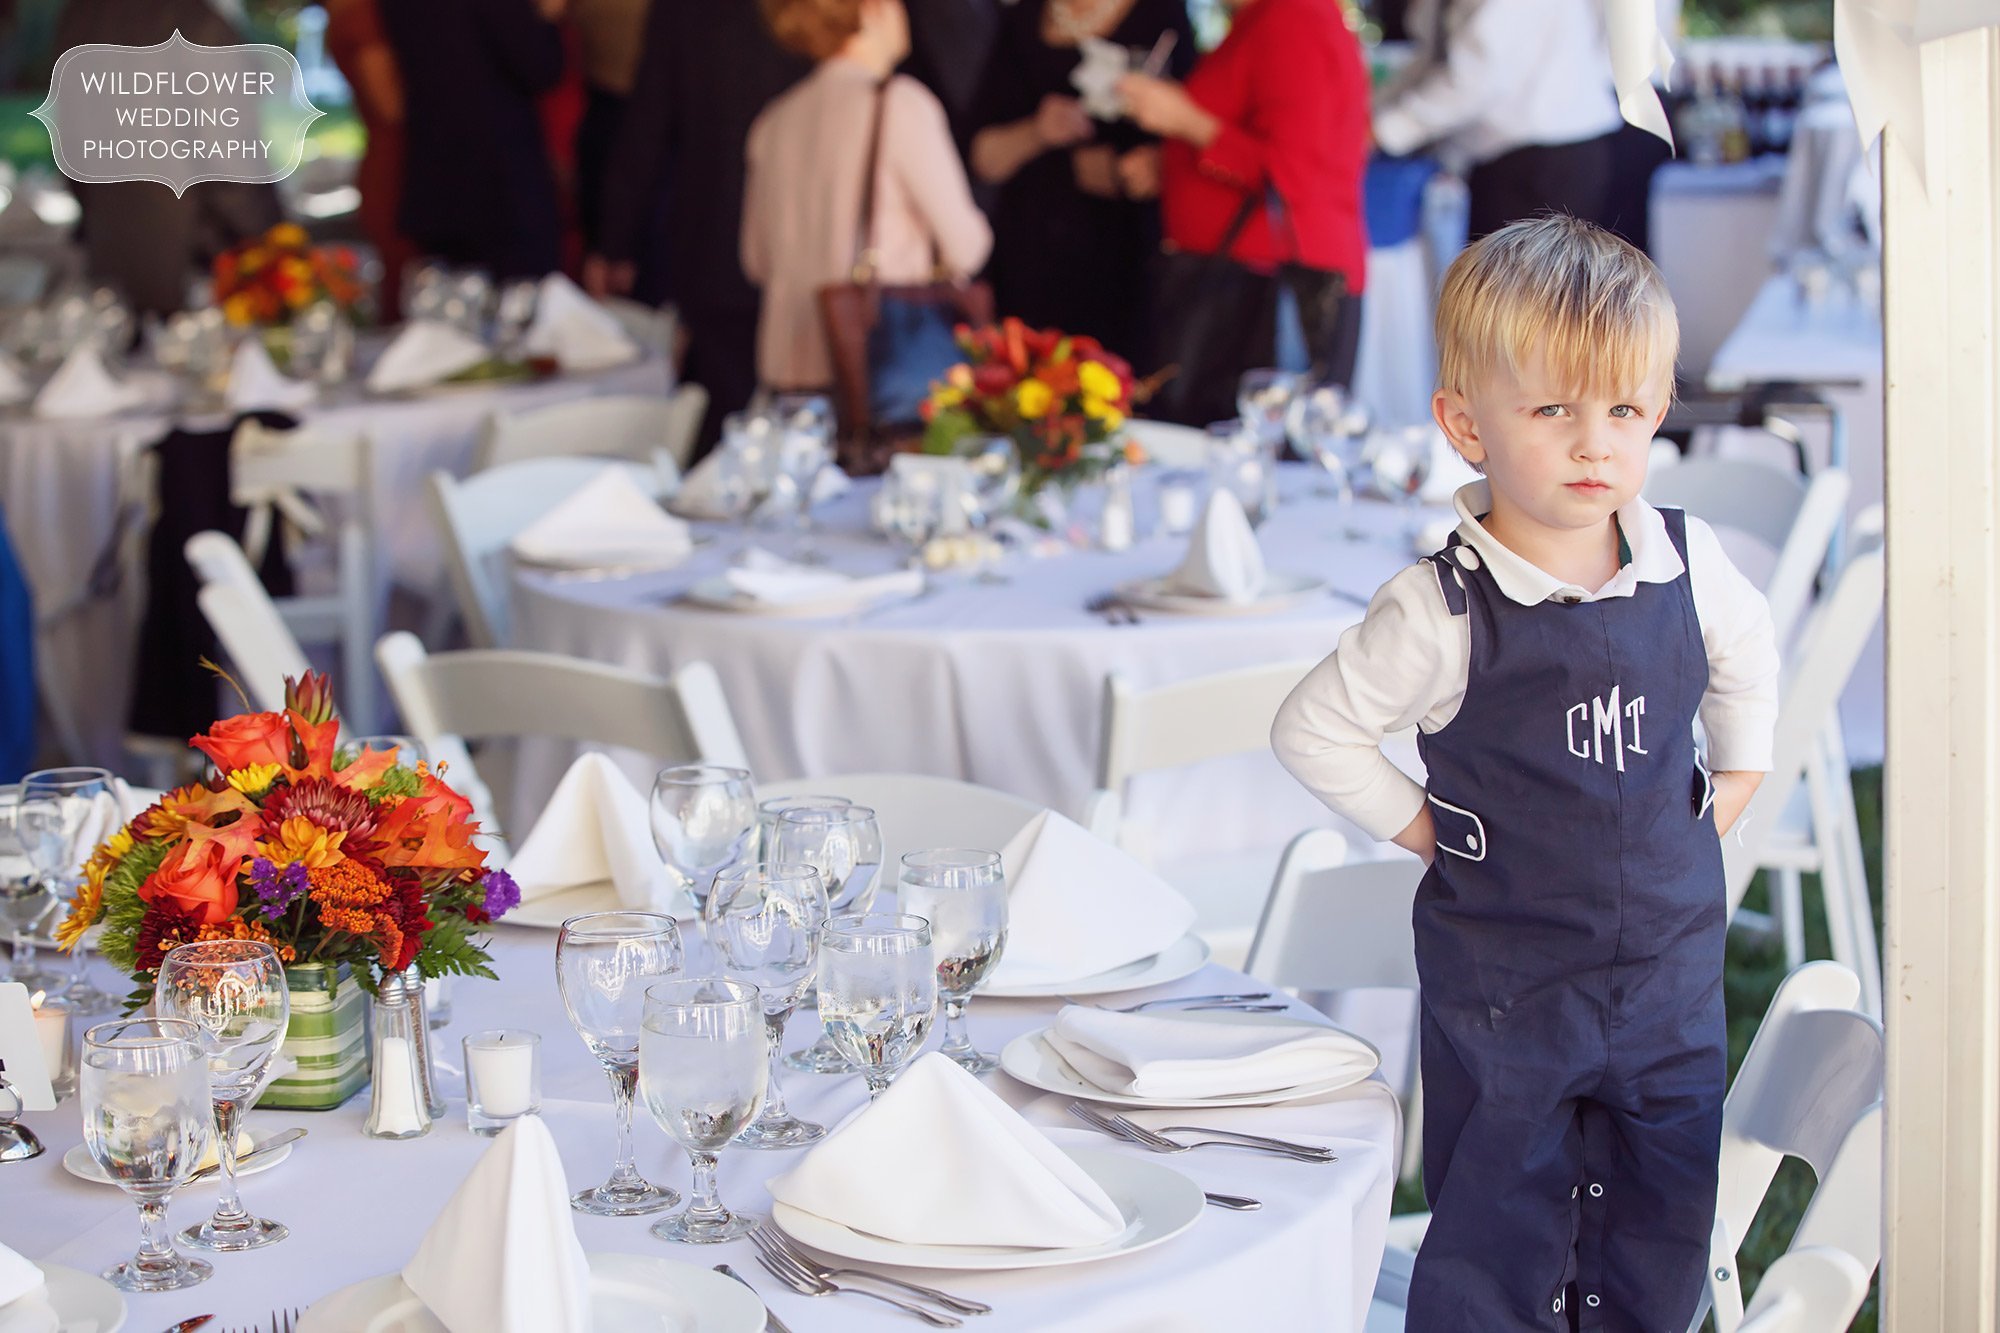 Funny photo of a toddler at this backyard wedding in St. Louis, MO.